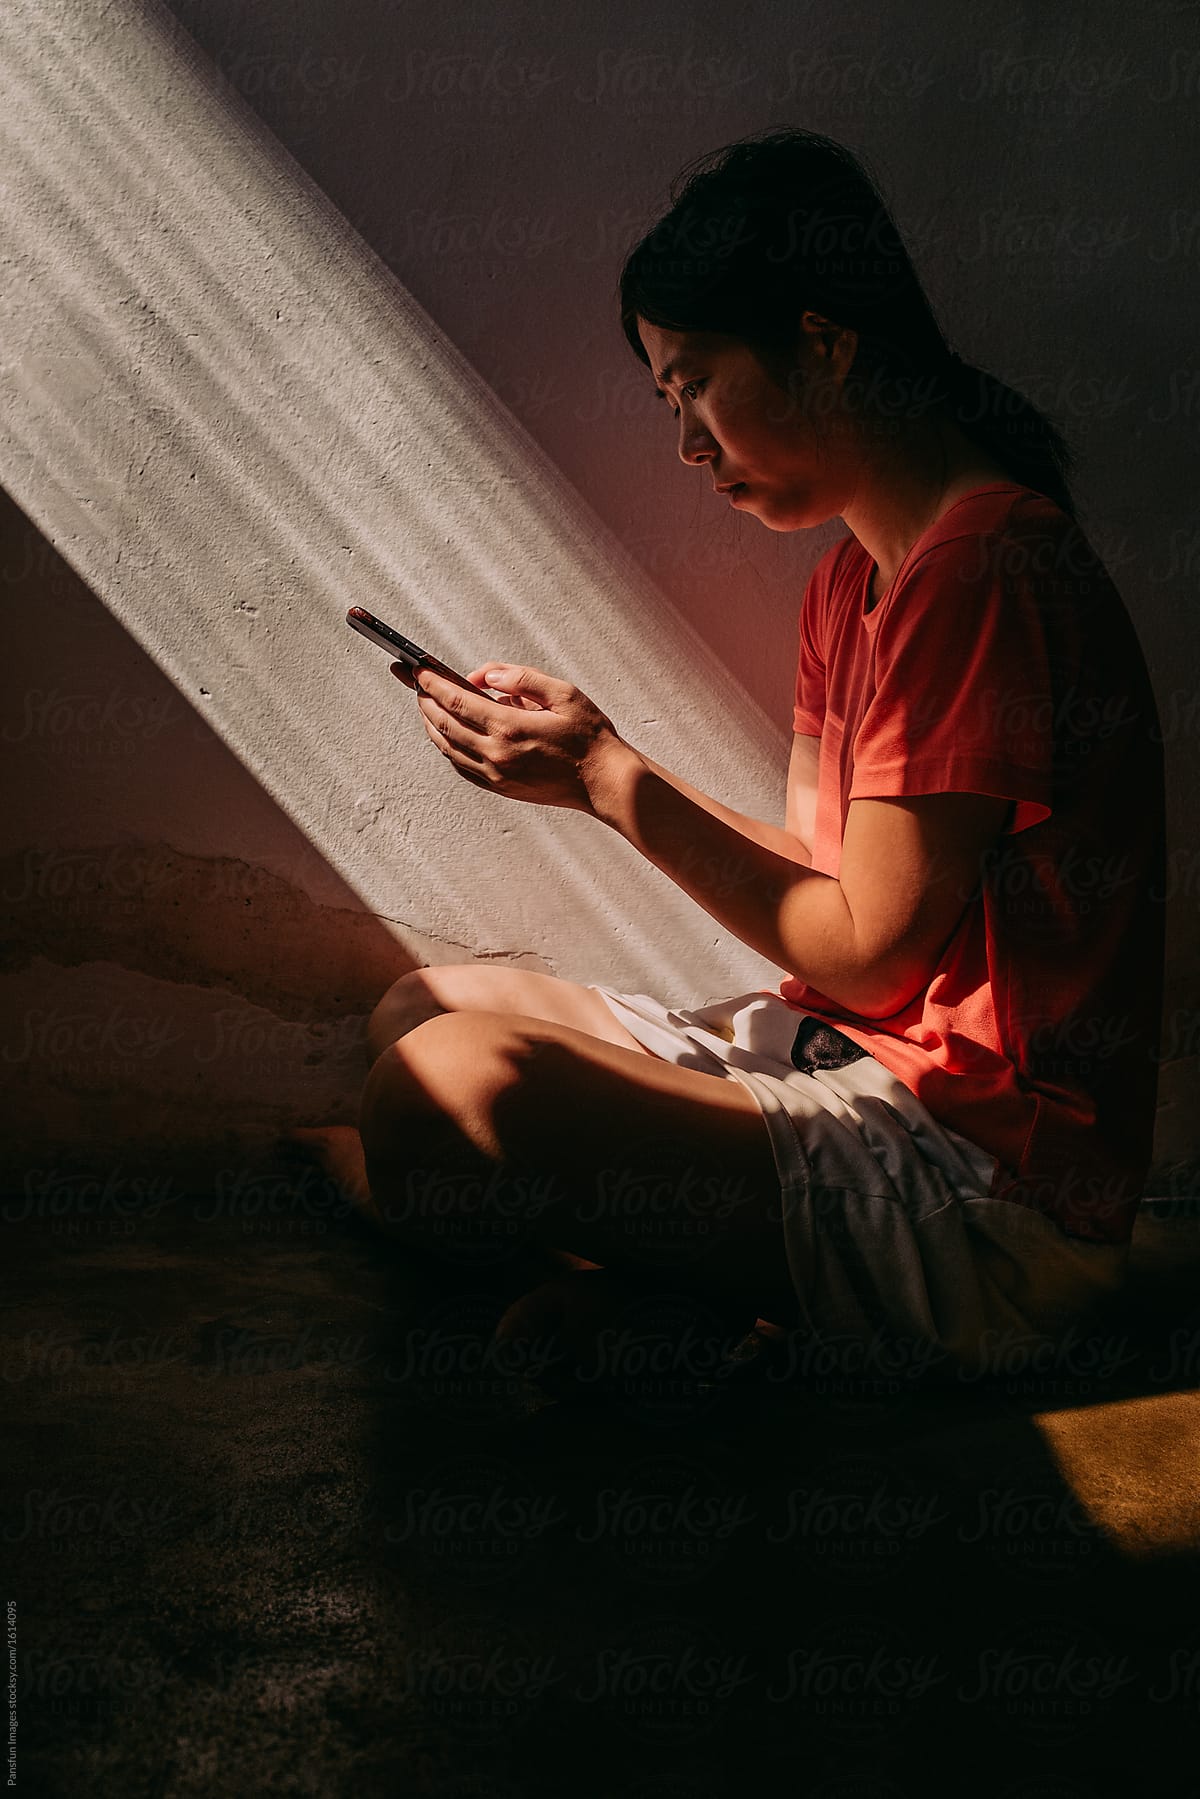 Asian woman using cell phone in dramatic sunlight